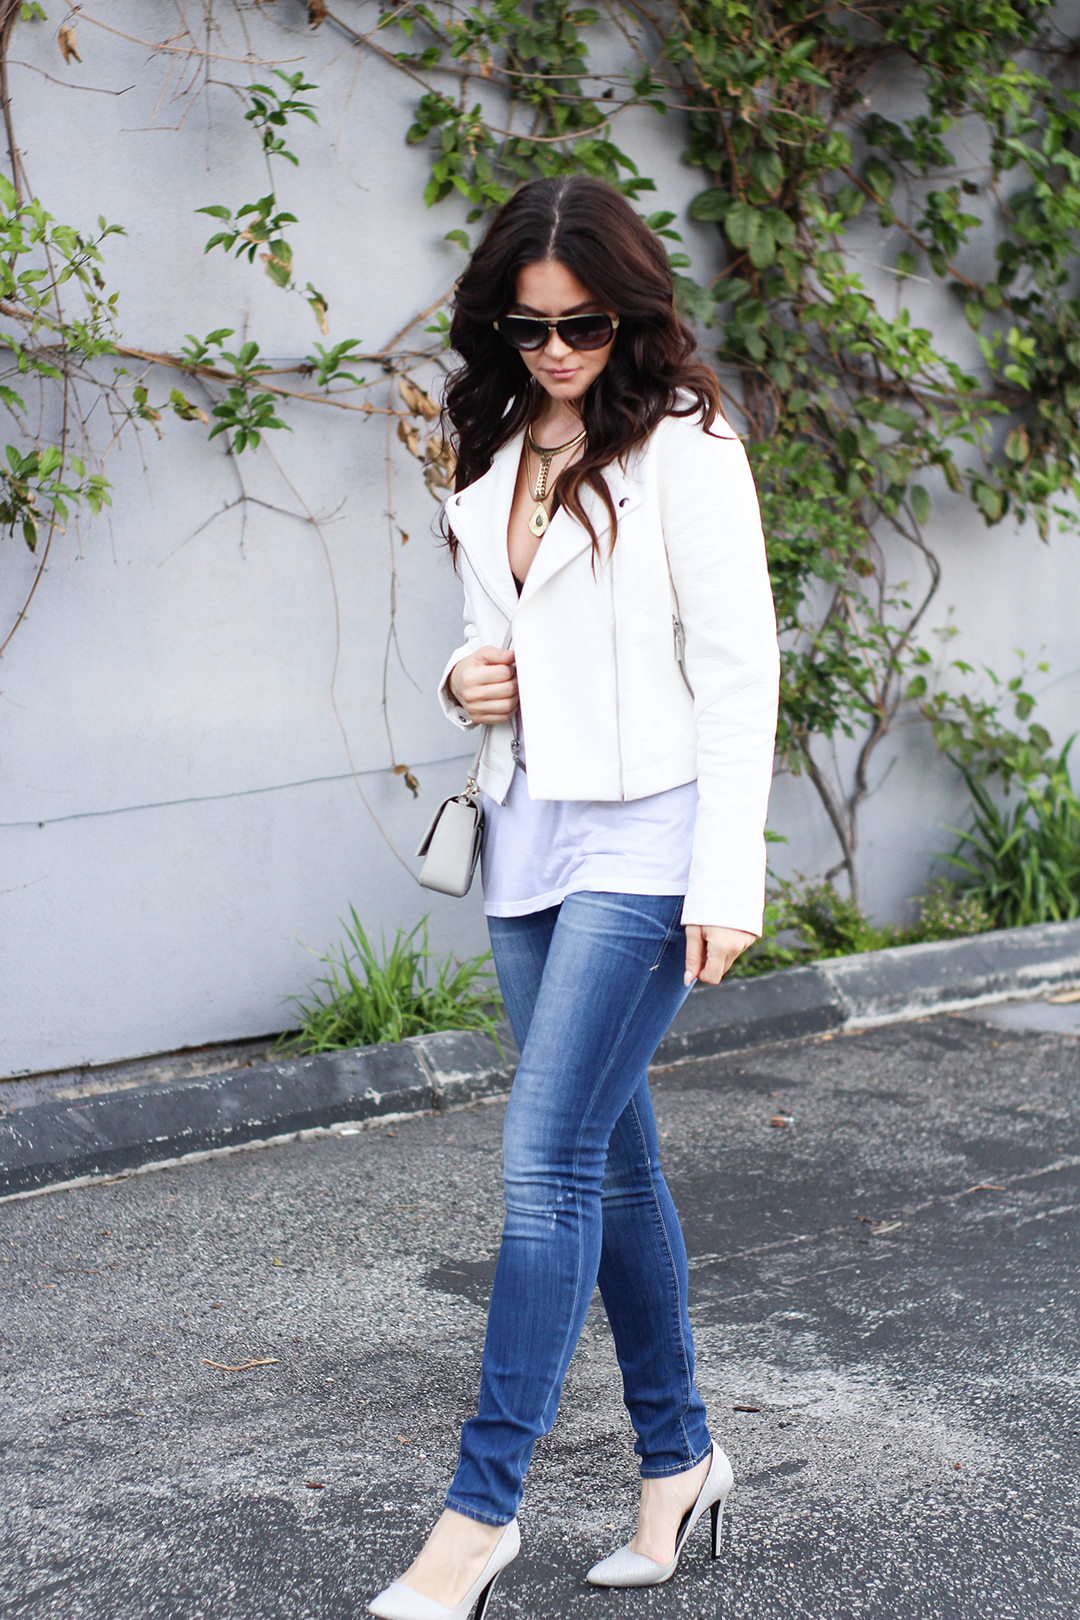 Styling a Deep V Tee - Glam Latte